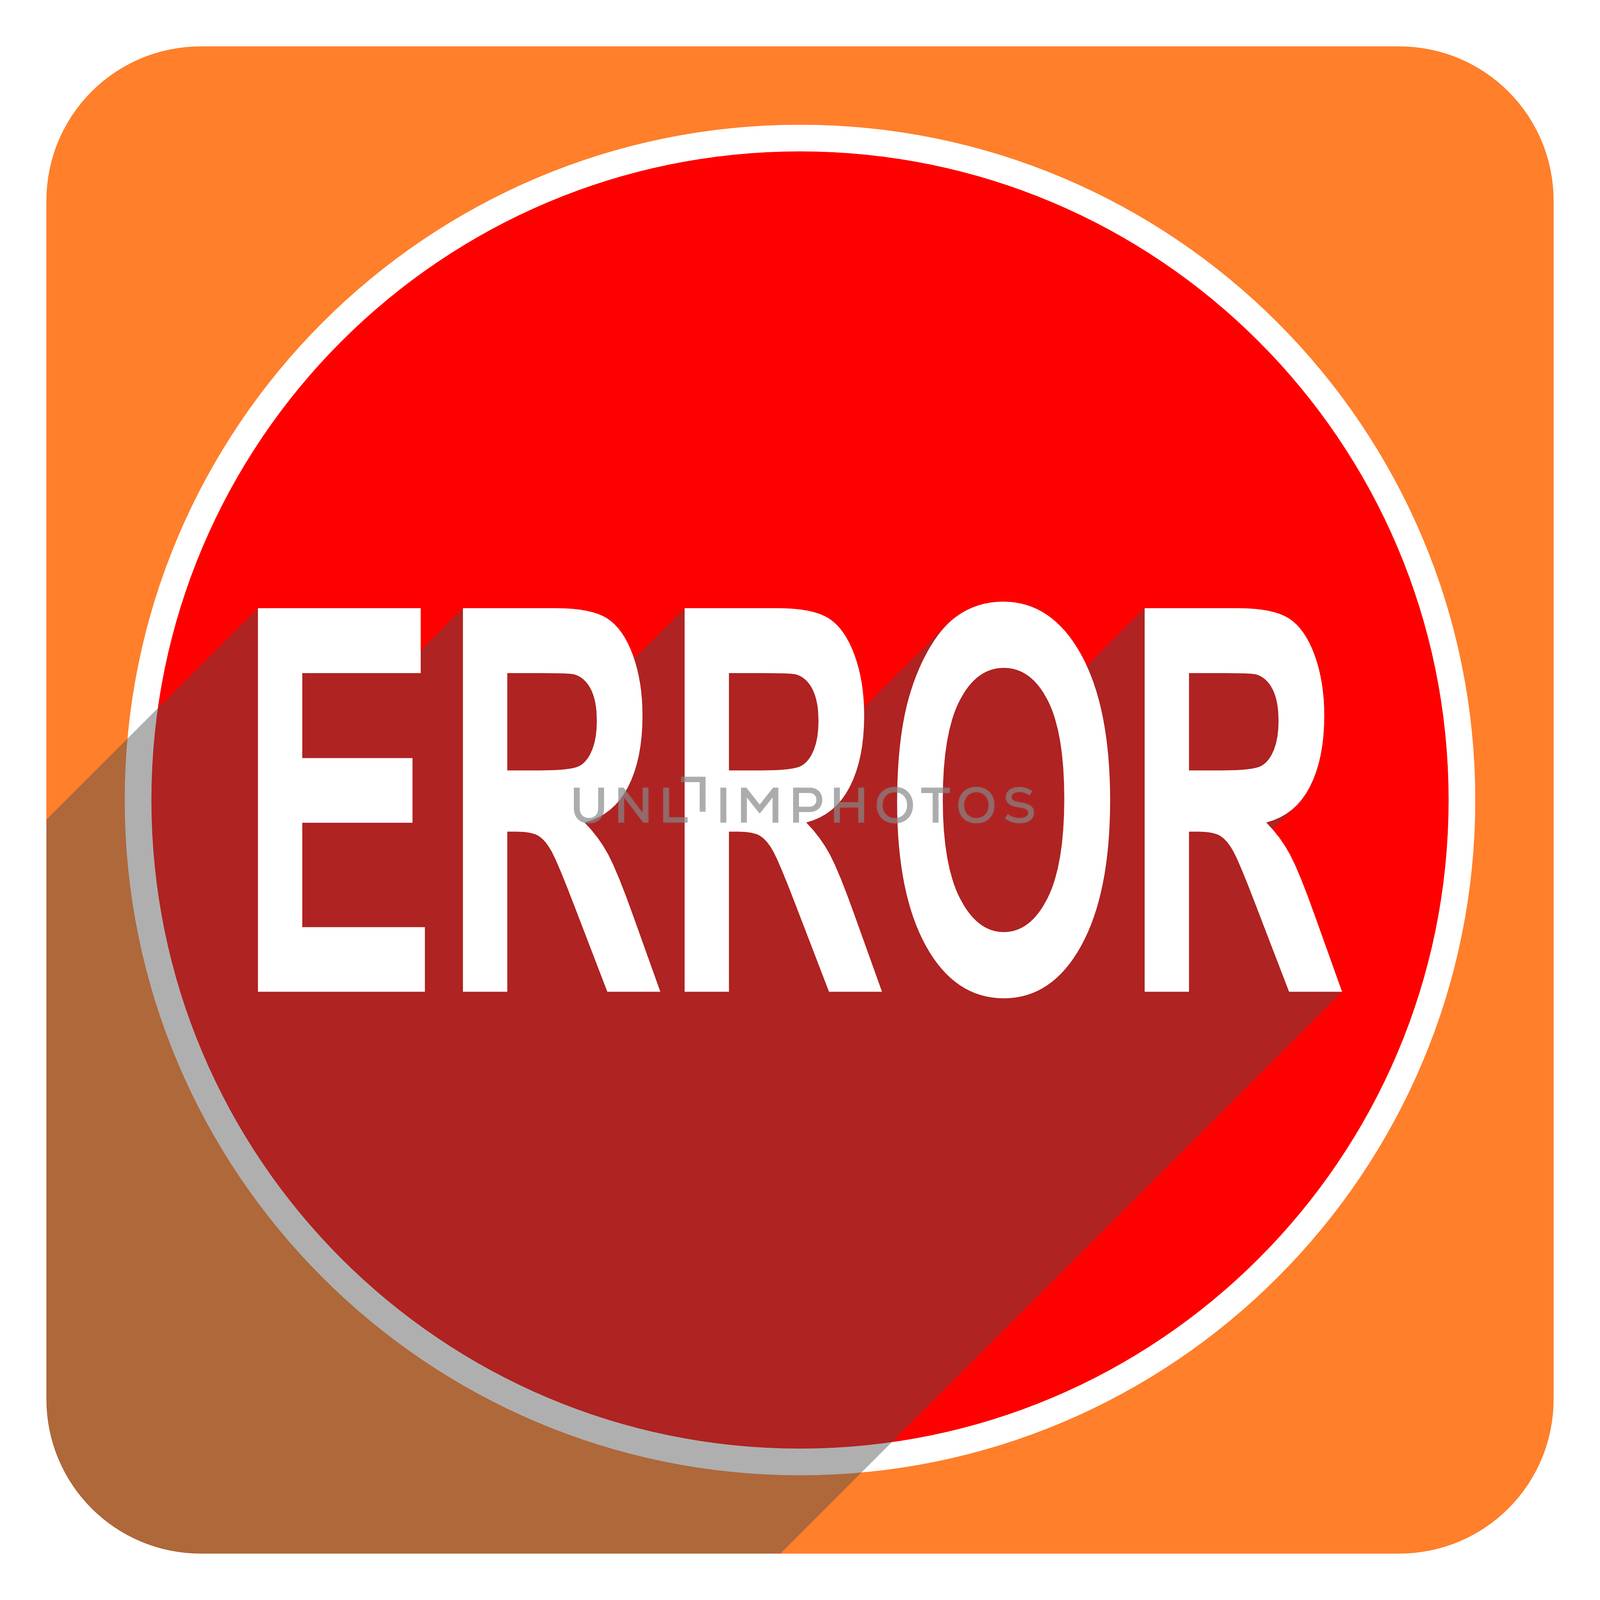 error red flat icon isolated